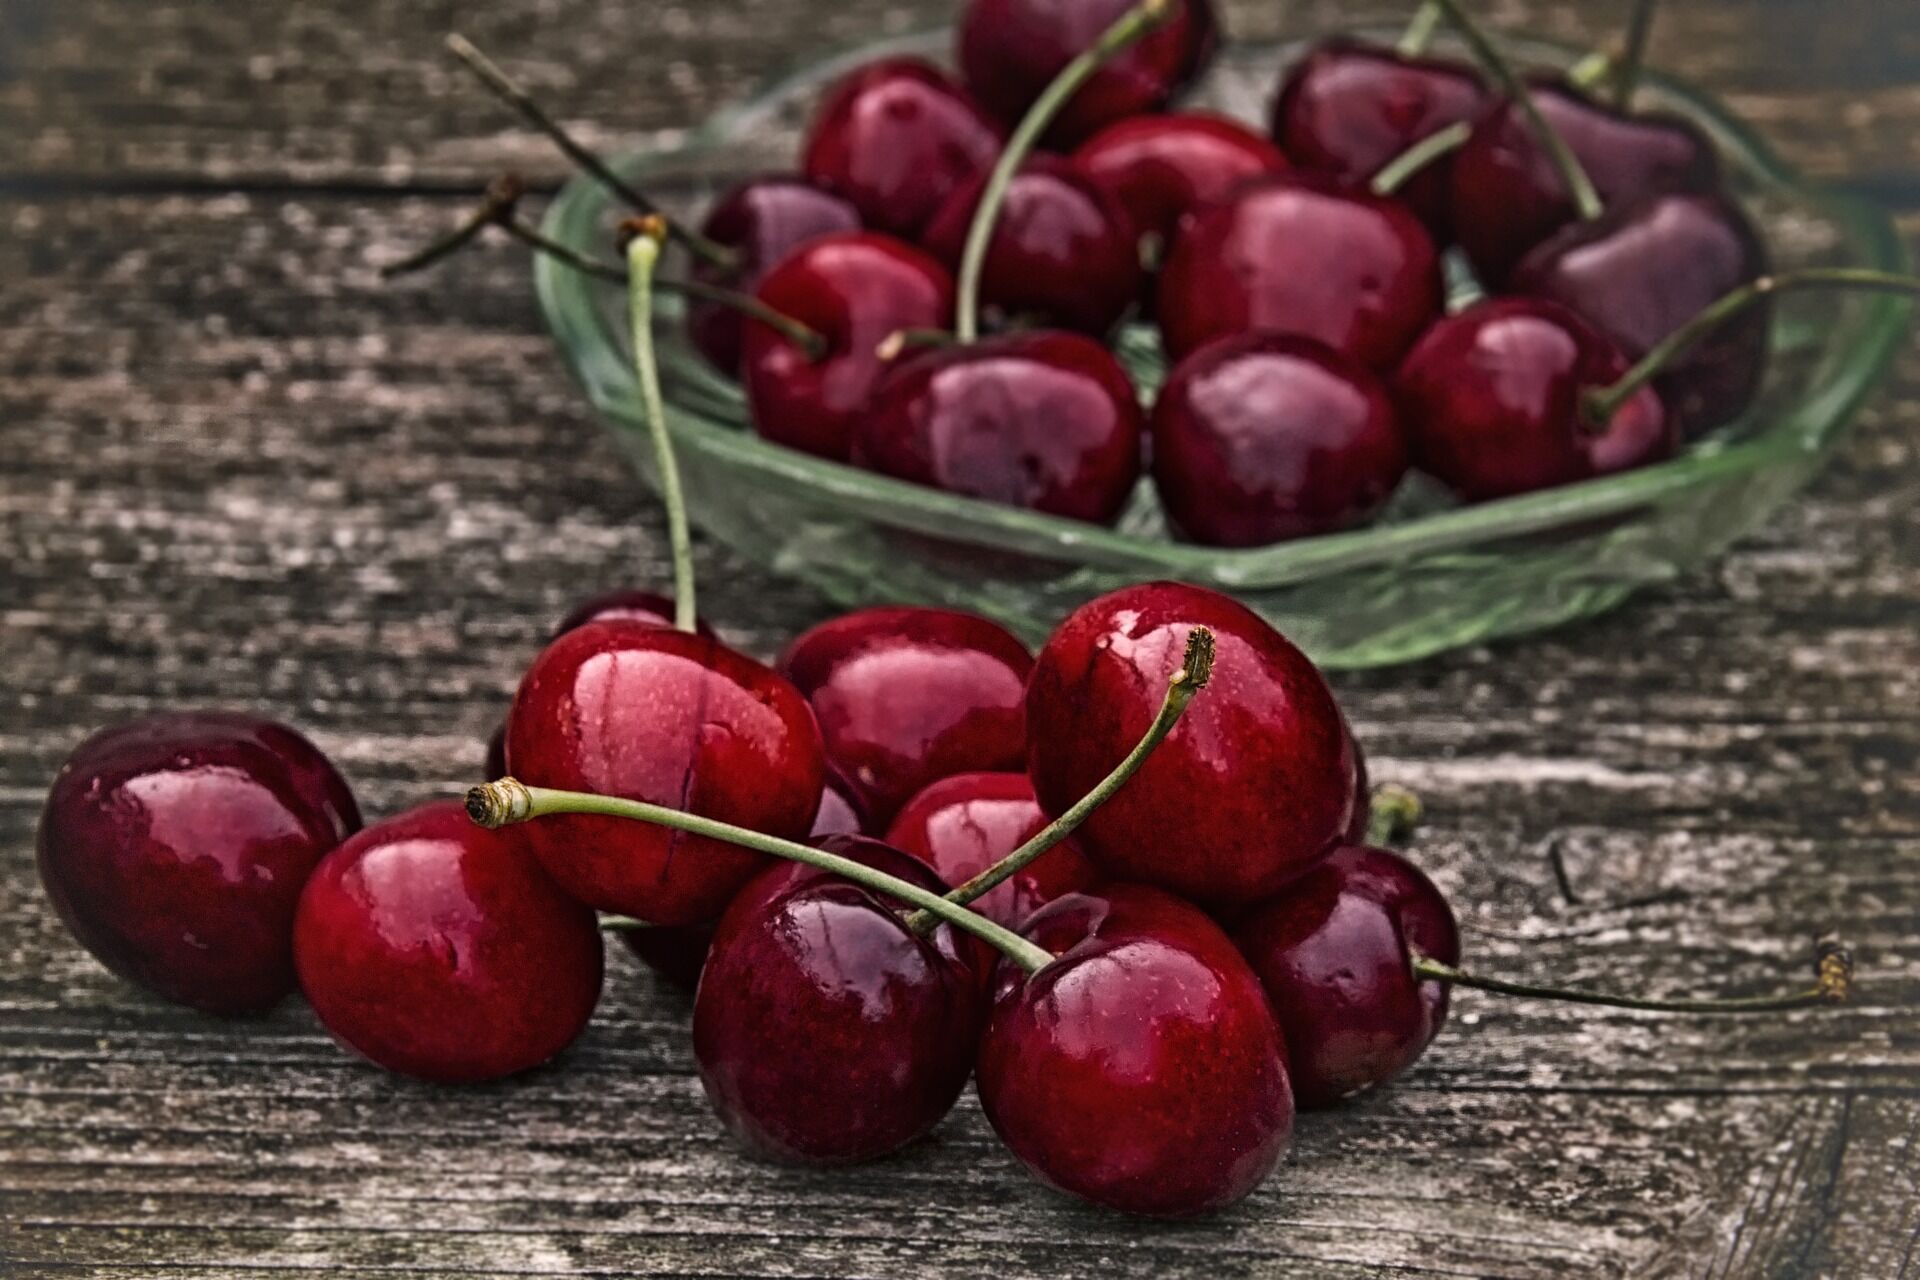 How to pickle sweet cherries